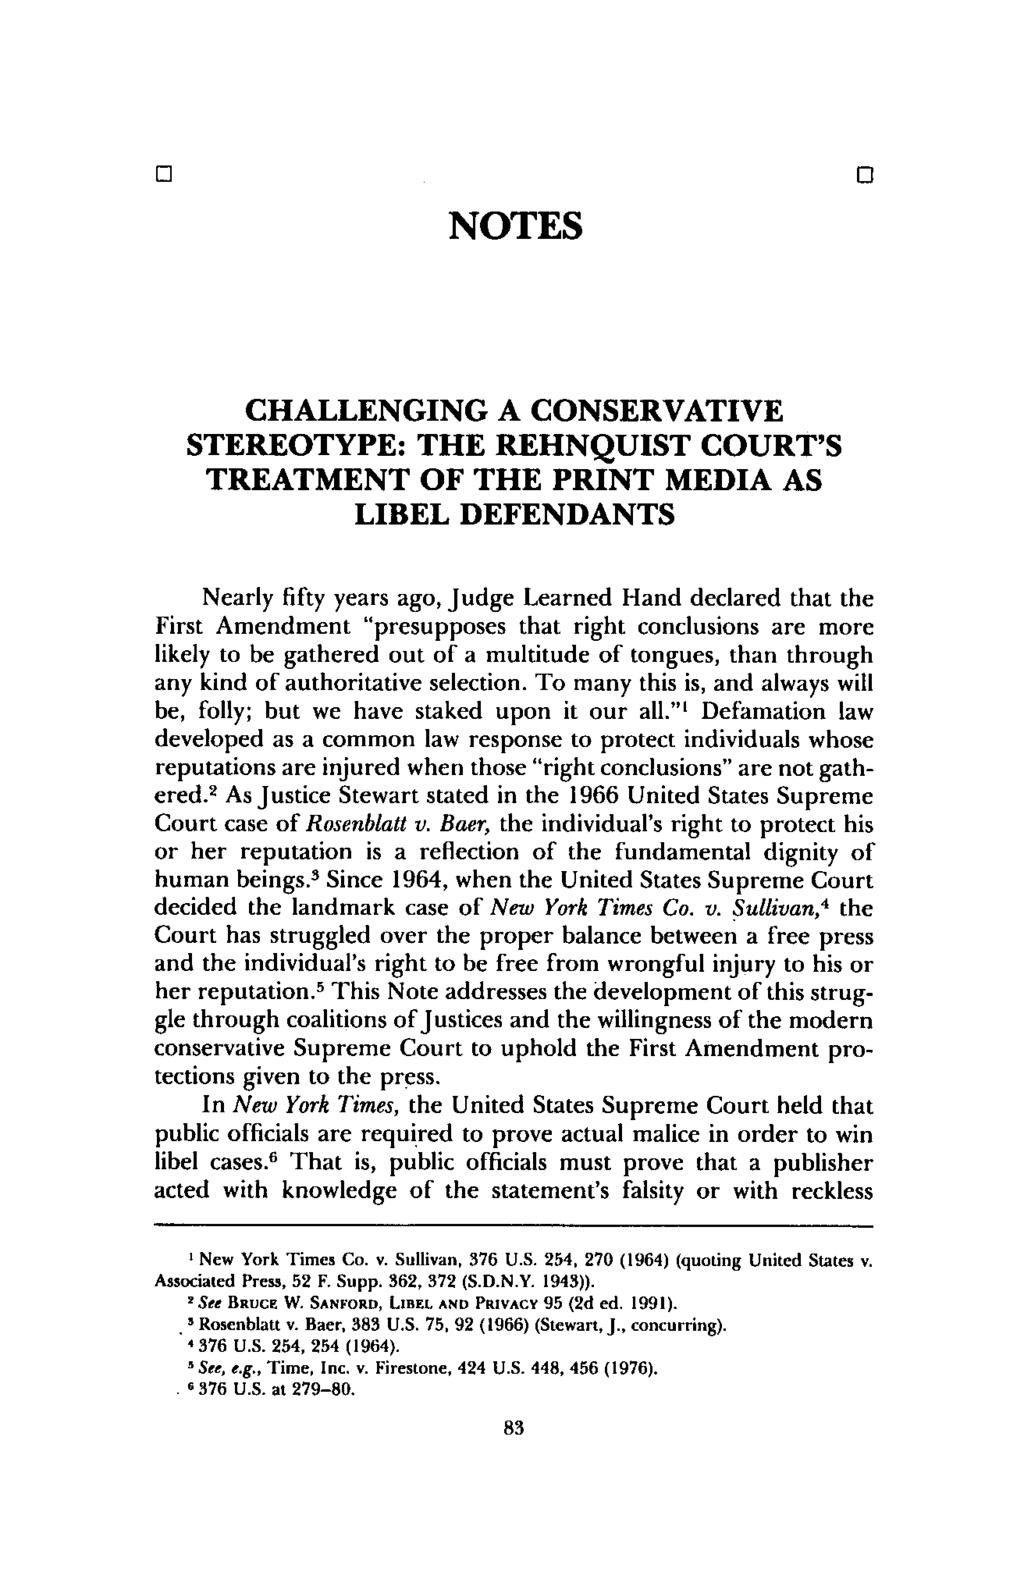 NOTES CHALLENGING A CONSERVATIVE STEREOTYPE: THE REHNQUIST COURT'S TREATMENT OF THE PRINT MEDIA AS LIBEL DEFENDANTS Nearly fifty years ago, Judge Learned Hand declared that the First Amendment